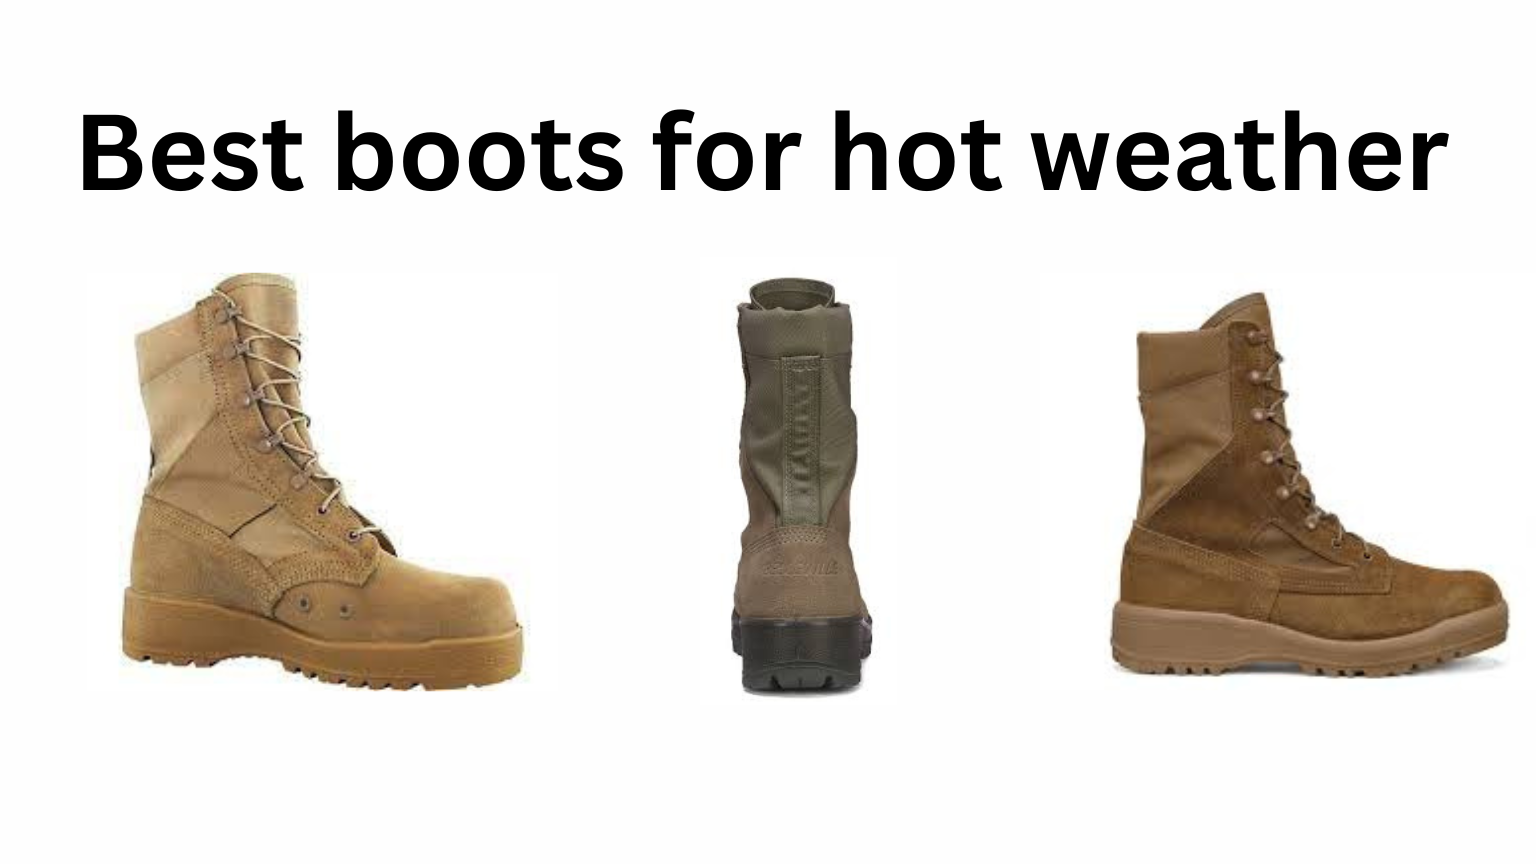 Boots for Hot Weather